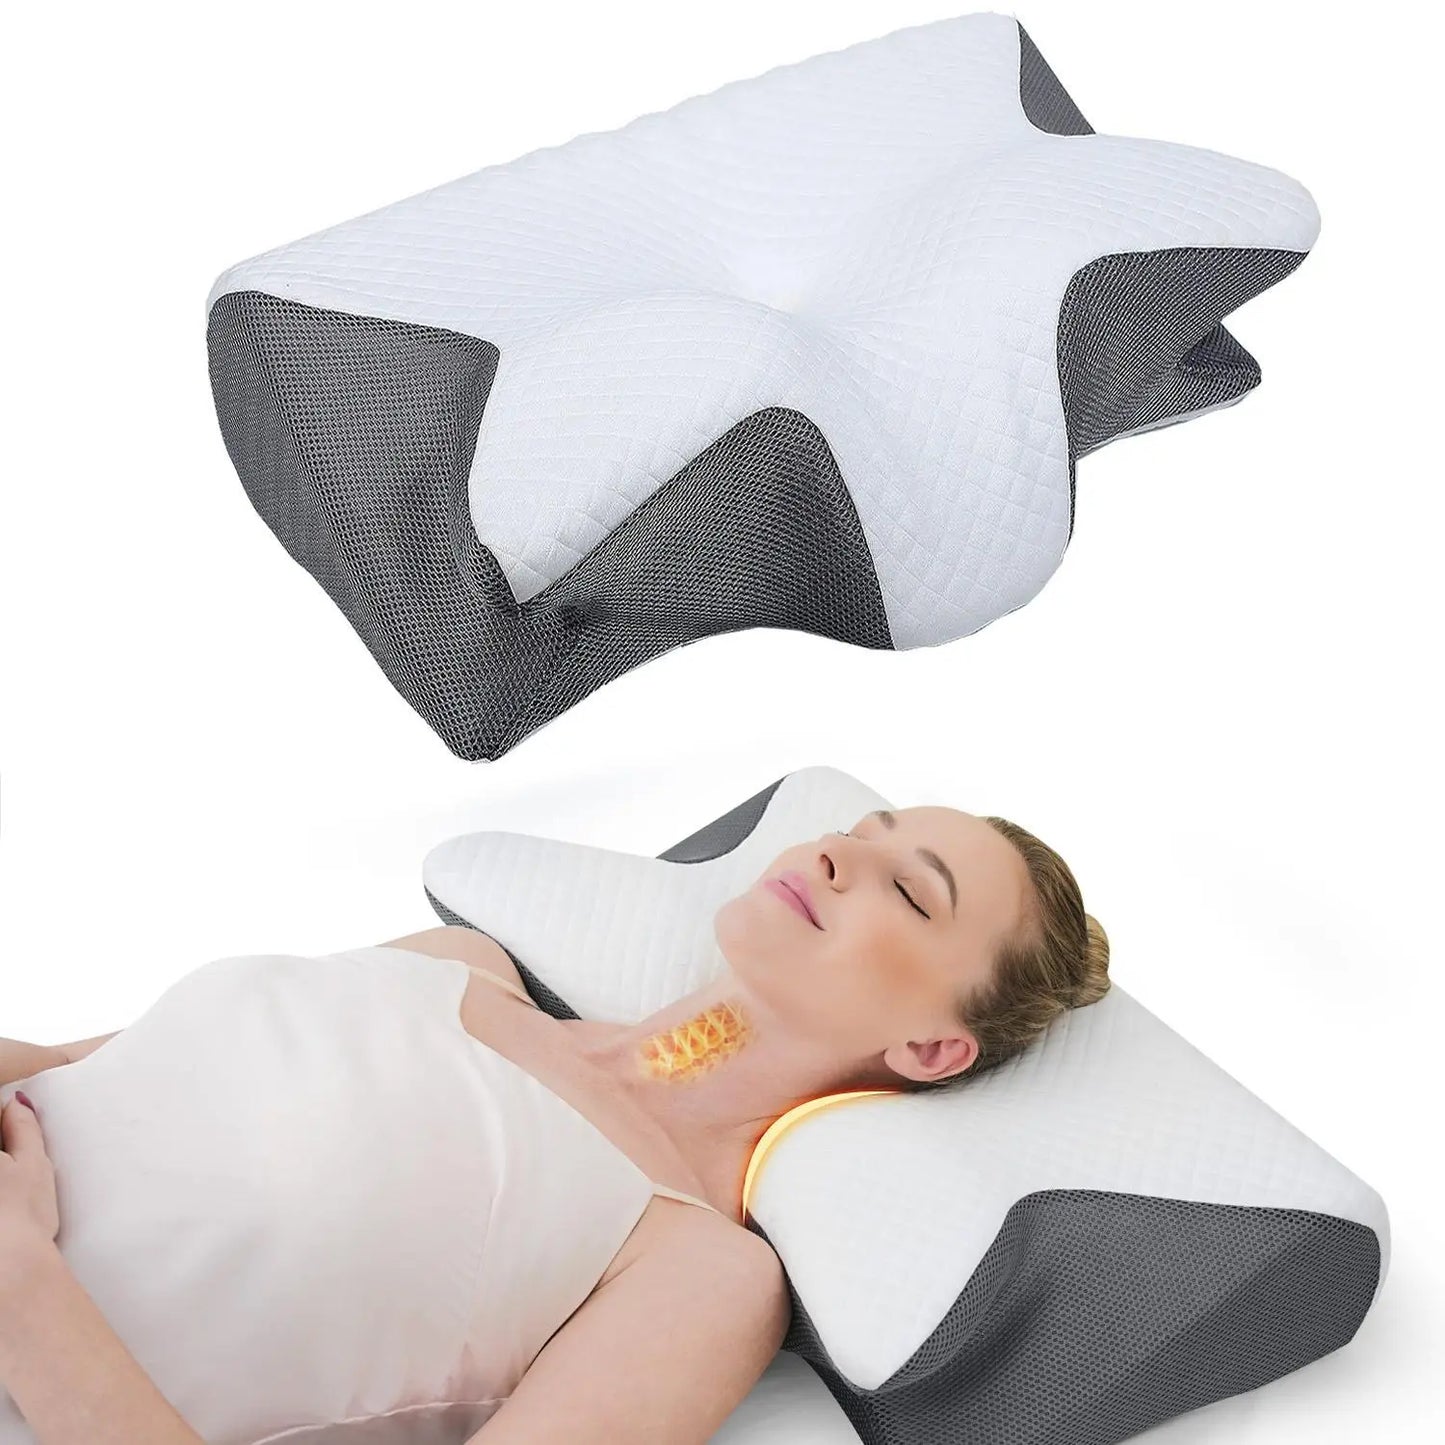 Memory Foam Neck Pillow, Soft Comfortable Contour Sleep Pillow for Spring Daily Use, Bed Neck Pillow for Side Back Sleepers, Bedroom Accessories